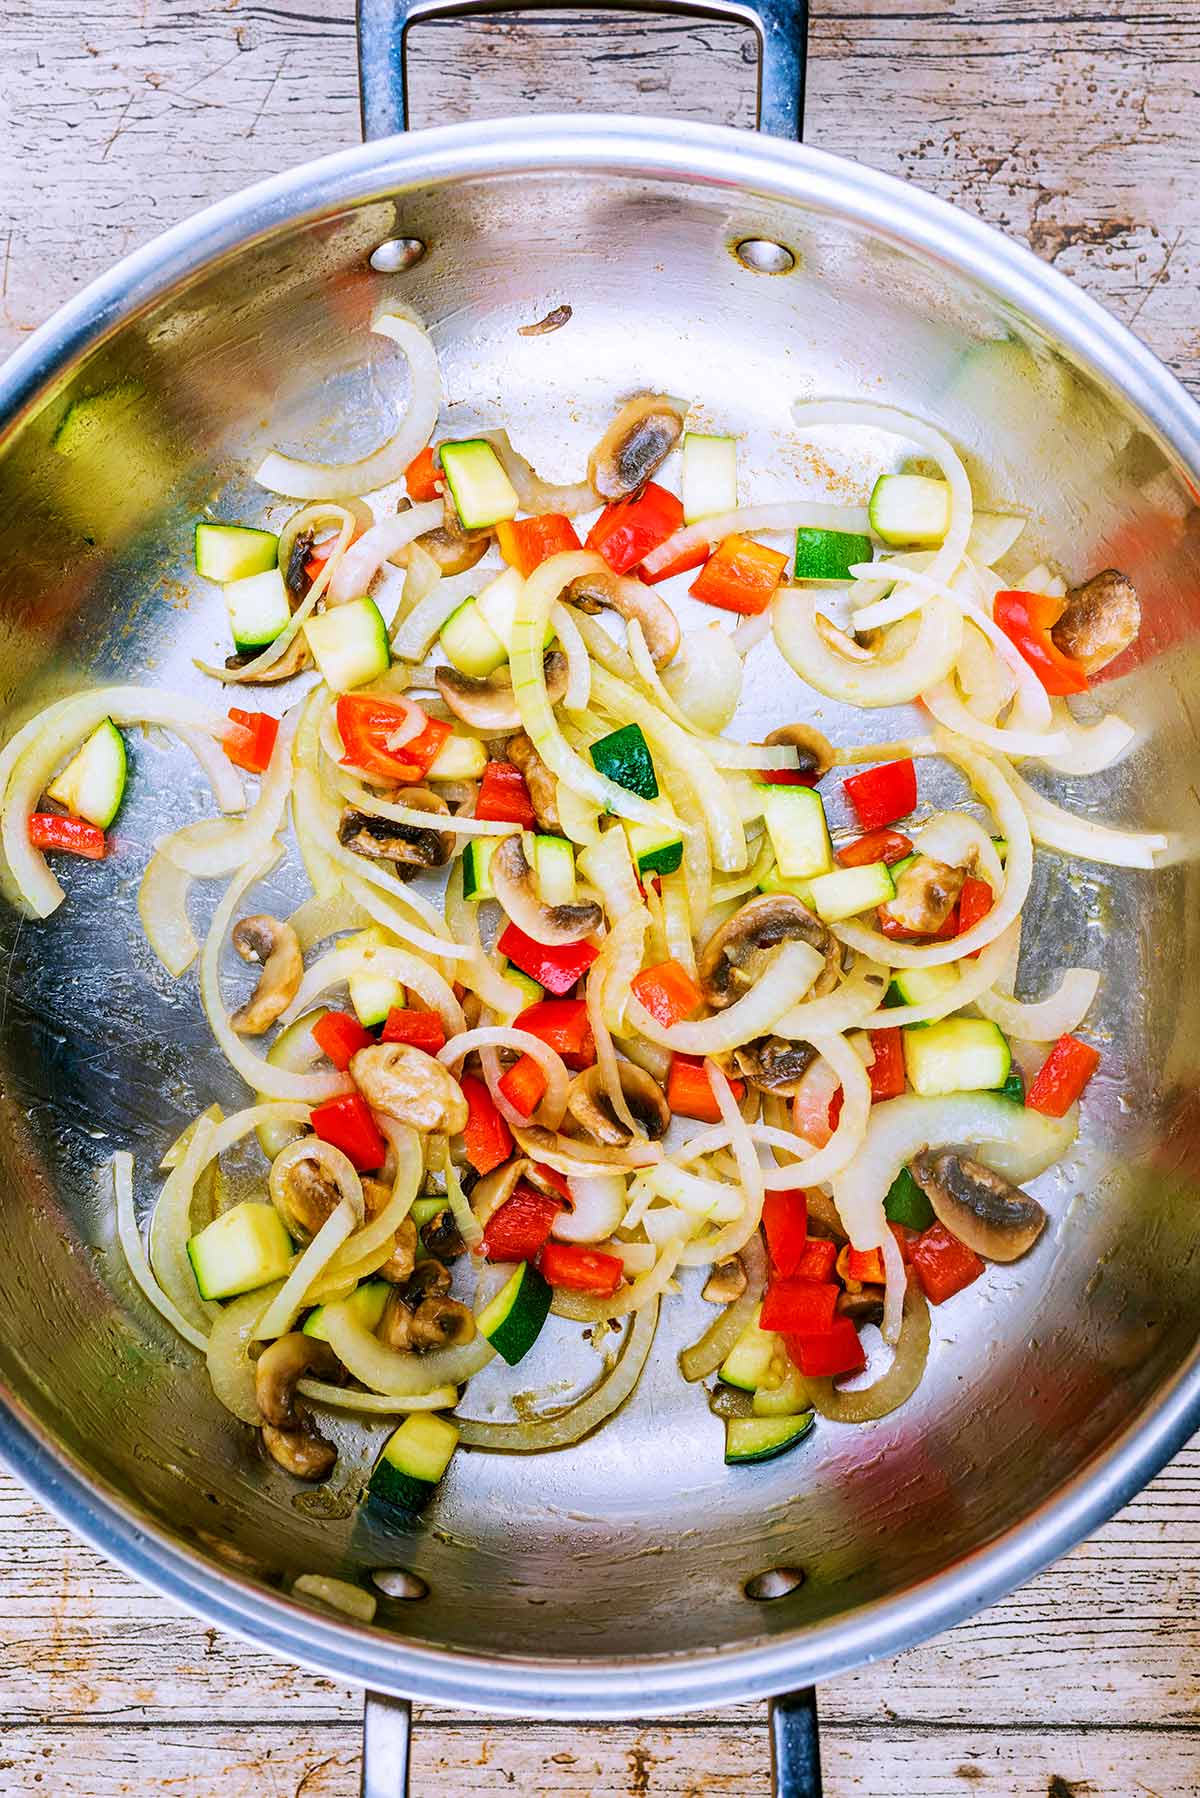 A large silver pan with onions, mushrooms, peppers and zucchini cooking in it.